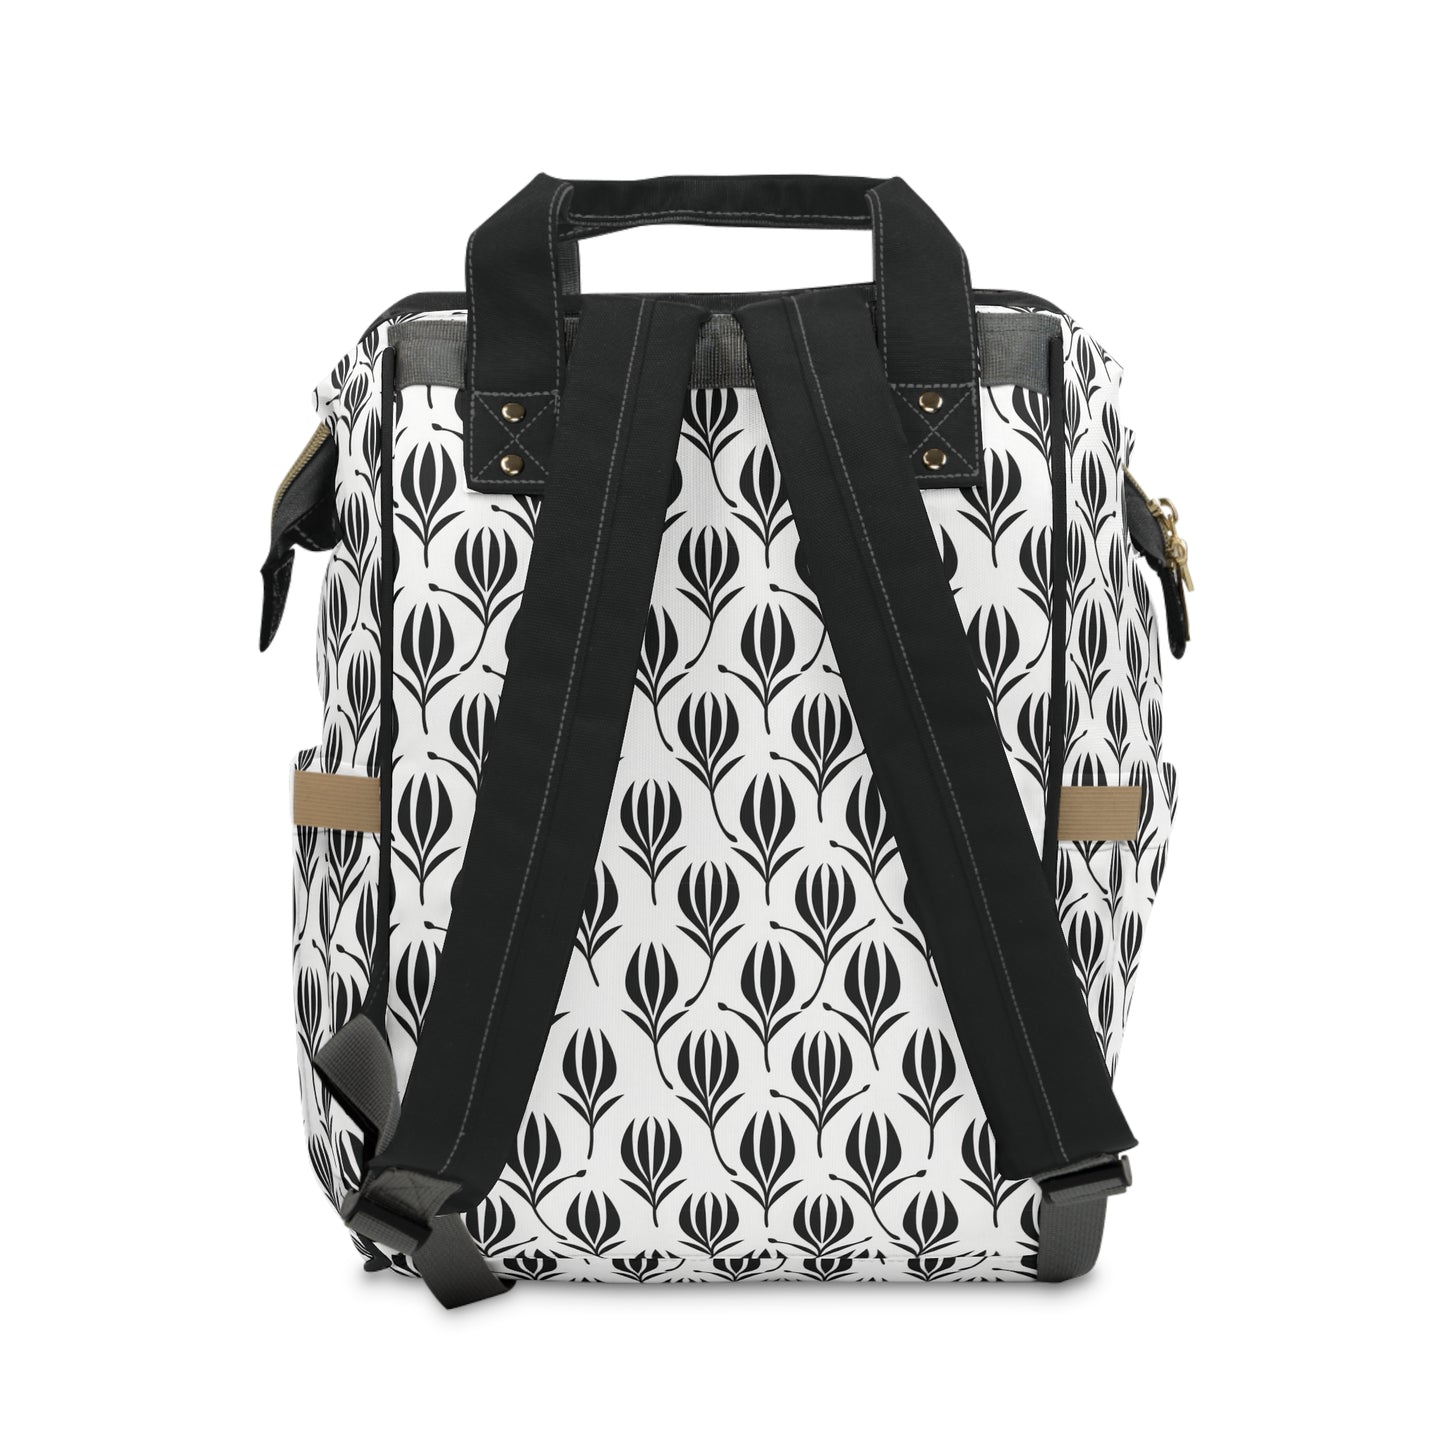 Multifunctional Monochrome Tulip Backpack for Every Adventure